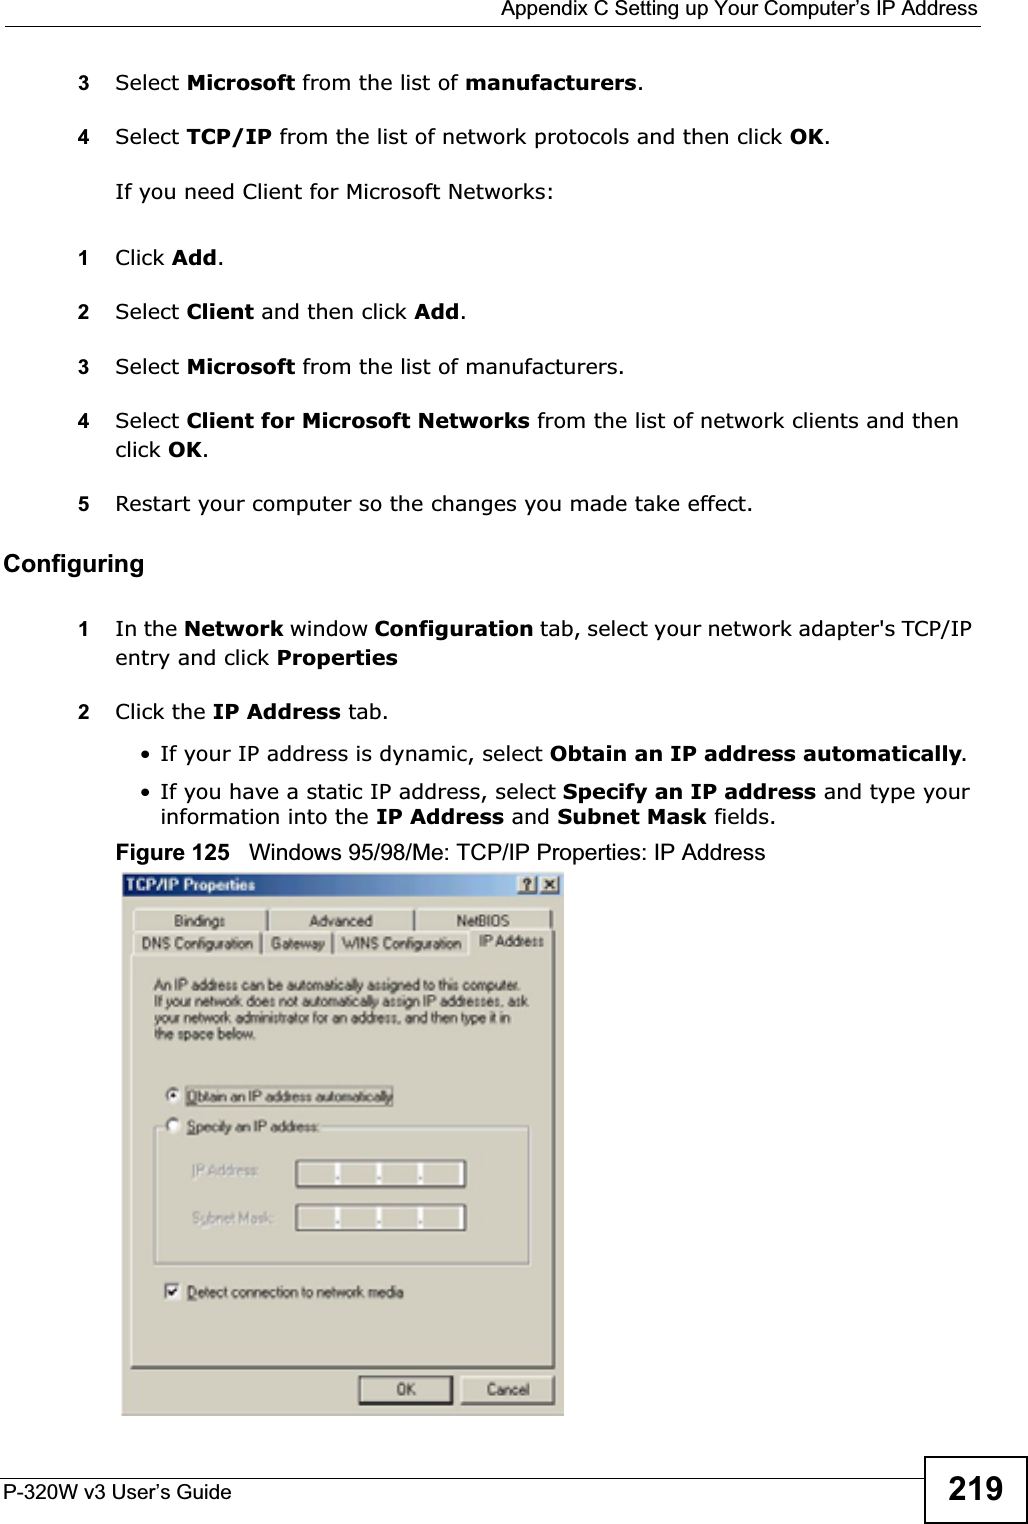  Appendix C Setting up Your Computer’s IP AddressP-320W v3 User’s Guide 2193Select Microsoft from the list of manufacturers.4Select TCP/IP from the list of network protocols and then click OK.If you need Client for Microsoft Networks:1Click Add.2Select Client and then click Add.3Select Microsoft from the list of manufacturers.4Select Client for Microsoft Networks from the list of network clients and then click OK.5Restart your computer so the changes you made take effect.Configuring1In the Network window Configuration tab, select your network adapter&apos;s TCP/IP entry and click Properties2Click the IP Address tab.• If your IP address is dynamic, select Obtain an IP address automatically.• If you have a static IP address, select Specify an IP address and type your information into the IP Address and Subnet Mask fields.Figure 125   Windows 95/98/Me: TCP/IP Properties: IP Address